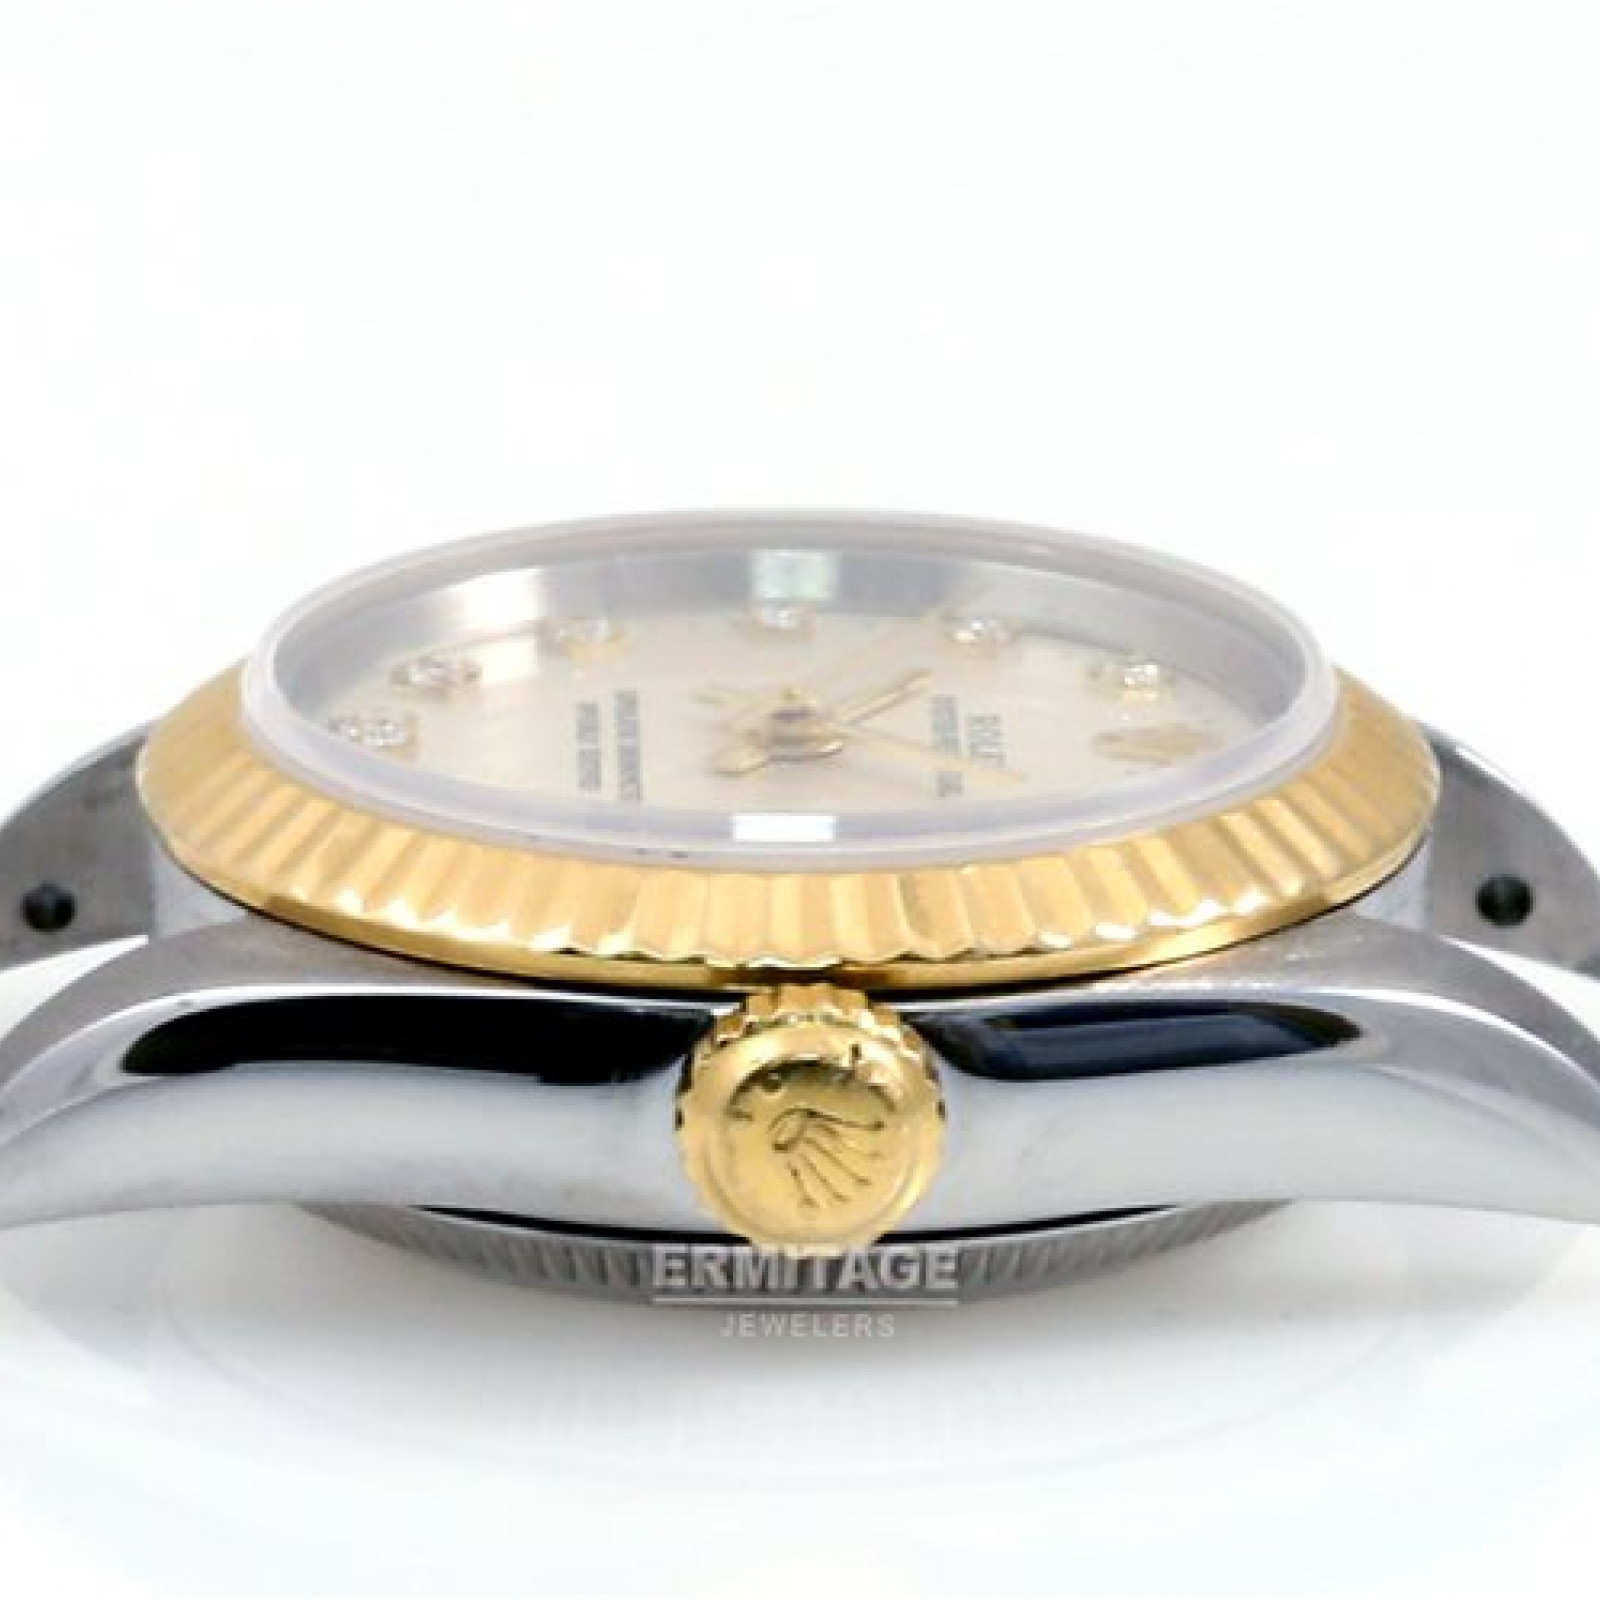 Silver Diamond Dial Rolex Oyster Perpetual 76193